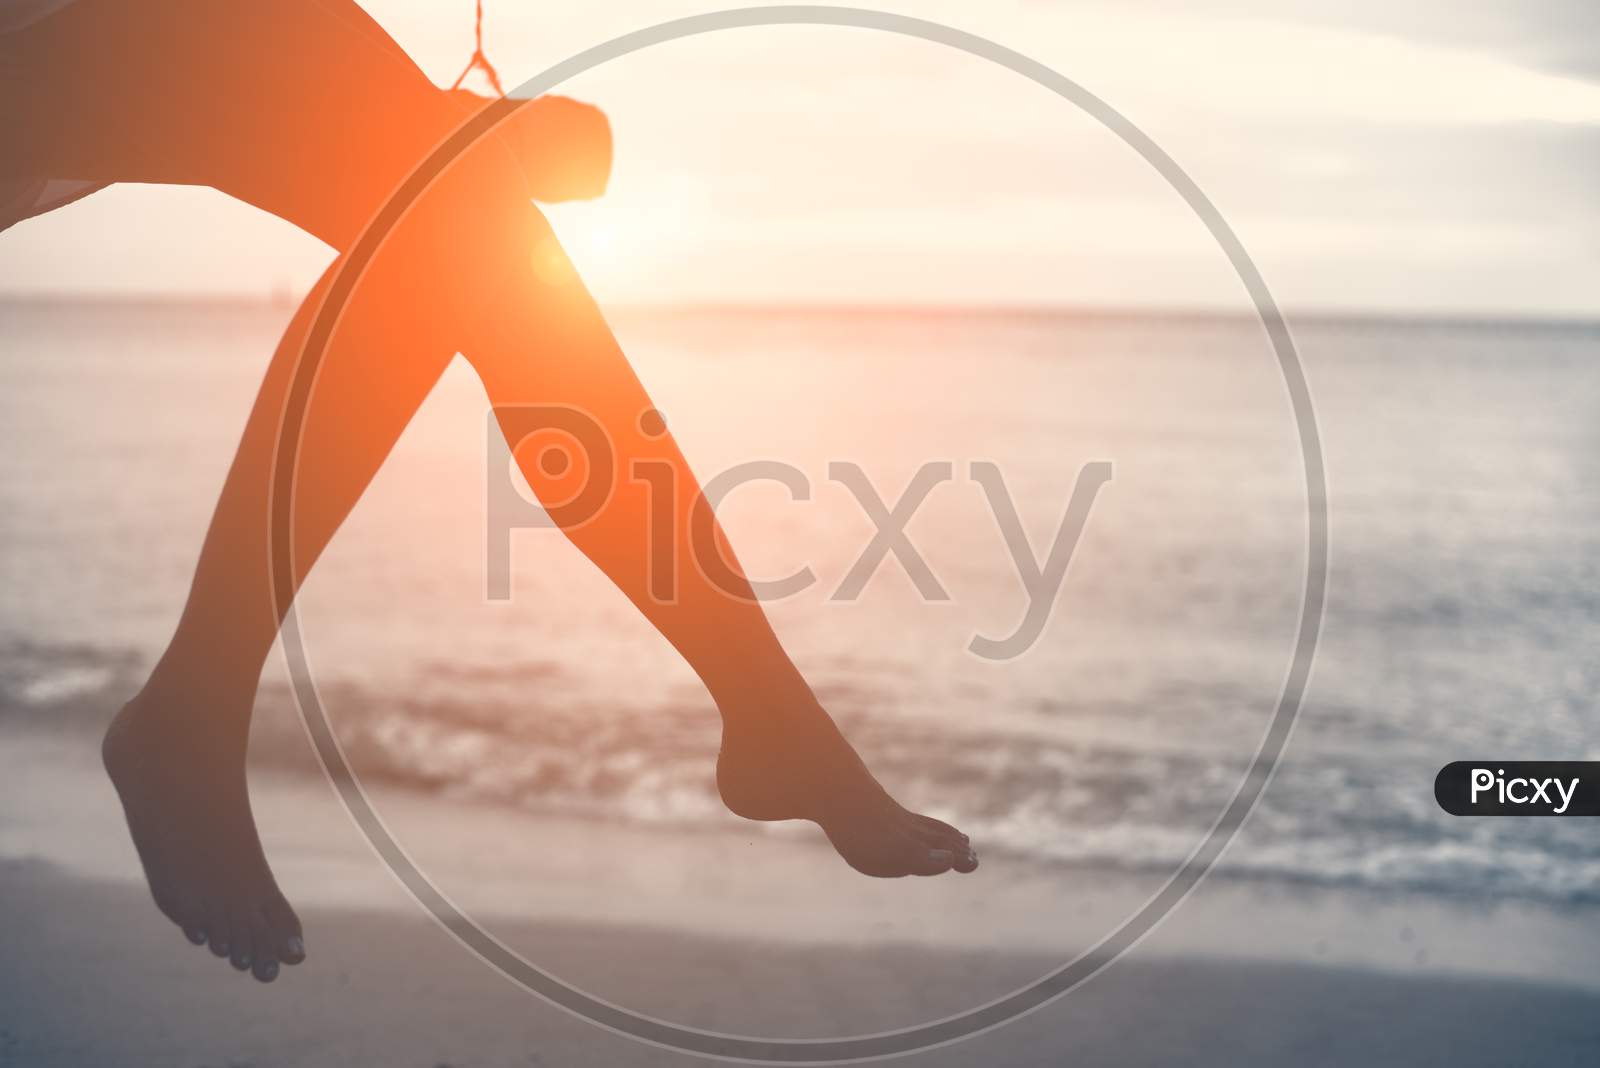 Woman Legs At Beach On Wooden Swing With Sunset. Single Woman Concept. People And Lifestyle Concept. Lonely And Sadness Concept. Beach And Sea Theme. Finding Soulmate Theme. Copy Space On Right